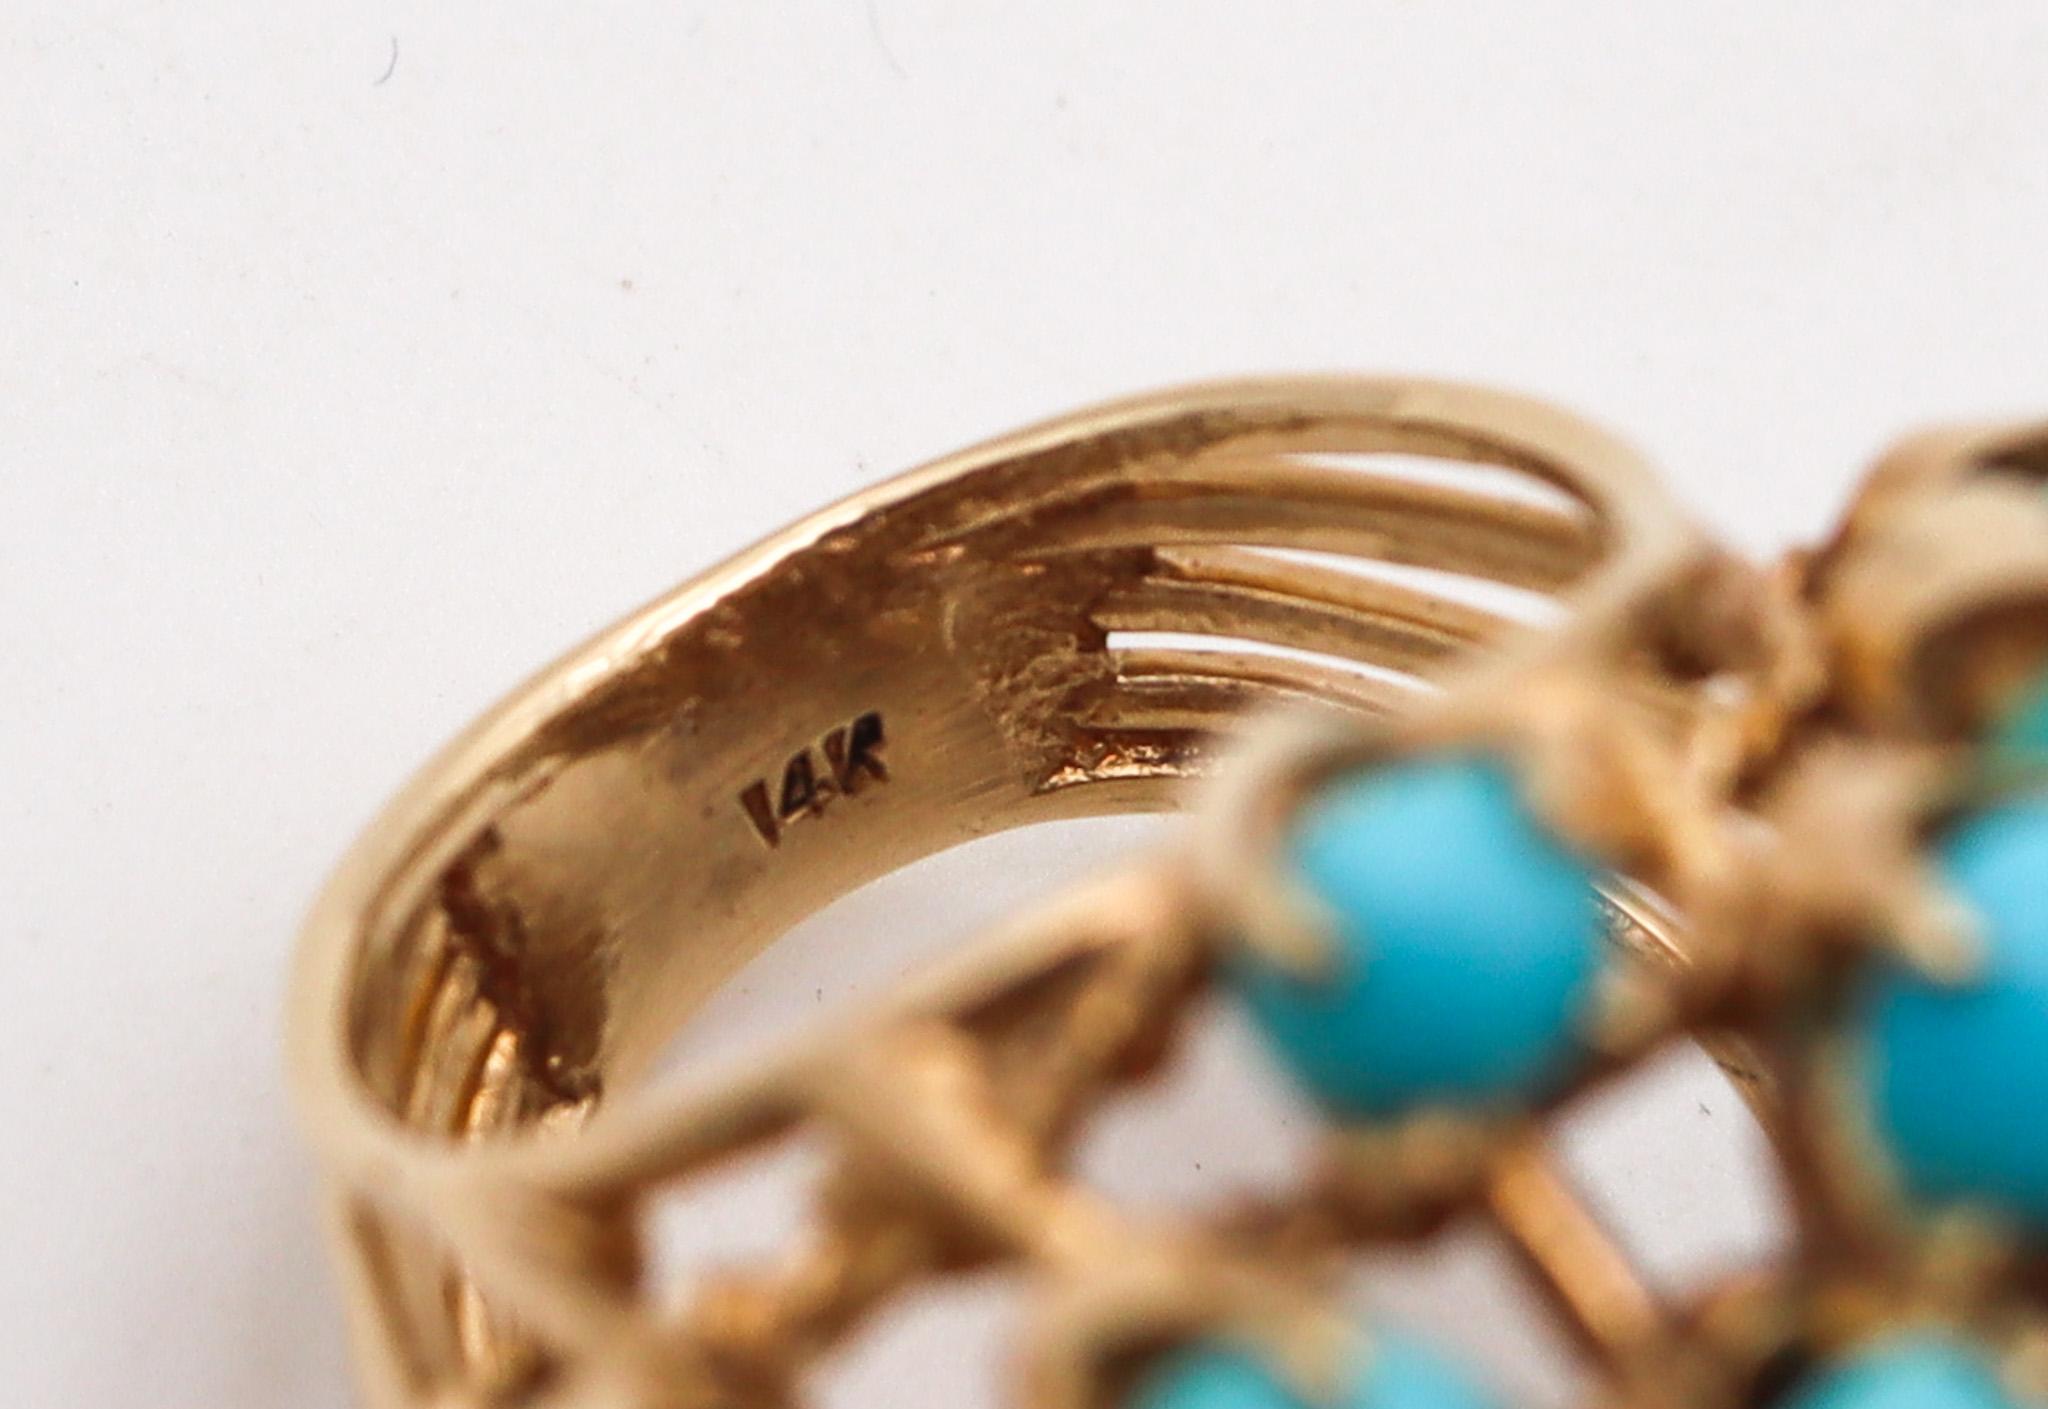 Women's Mid Century 1960 Modernist Cluster Ring In 14Kt Gold With 25.56 Ctw In Turquoise For Sale